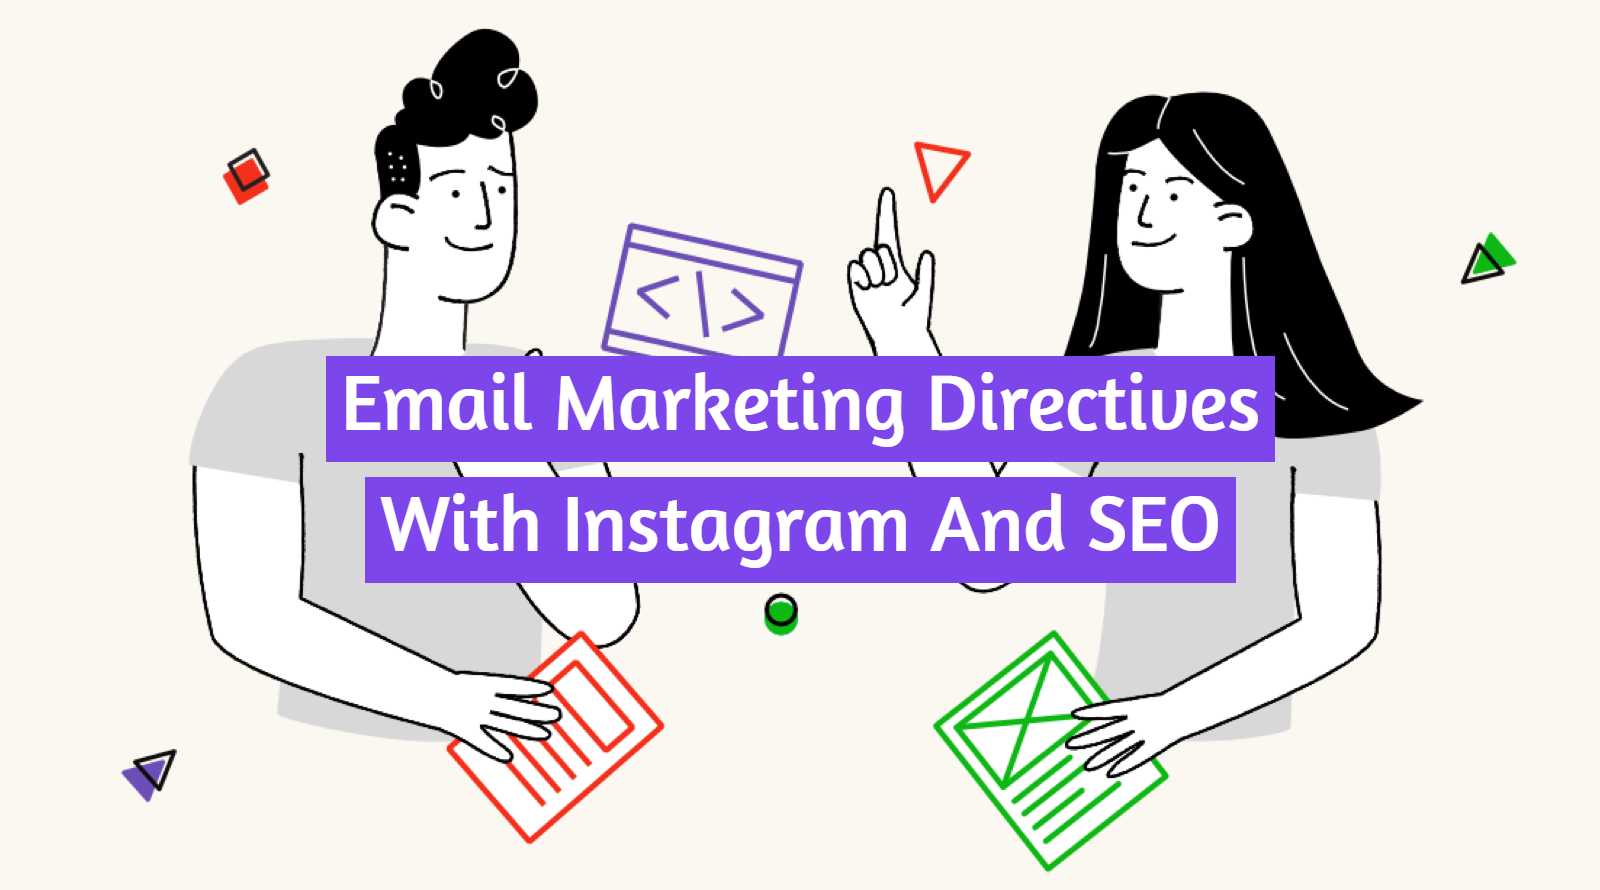 Syncing Your Email Marketing Directives With Instagram And SEO